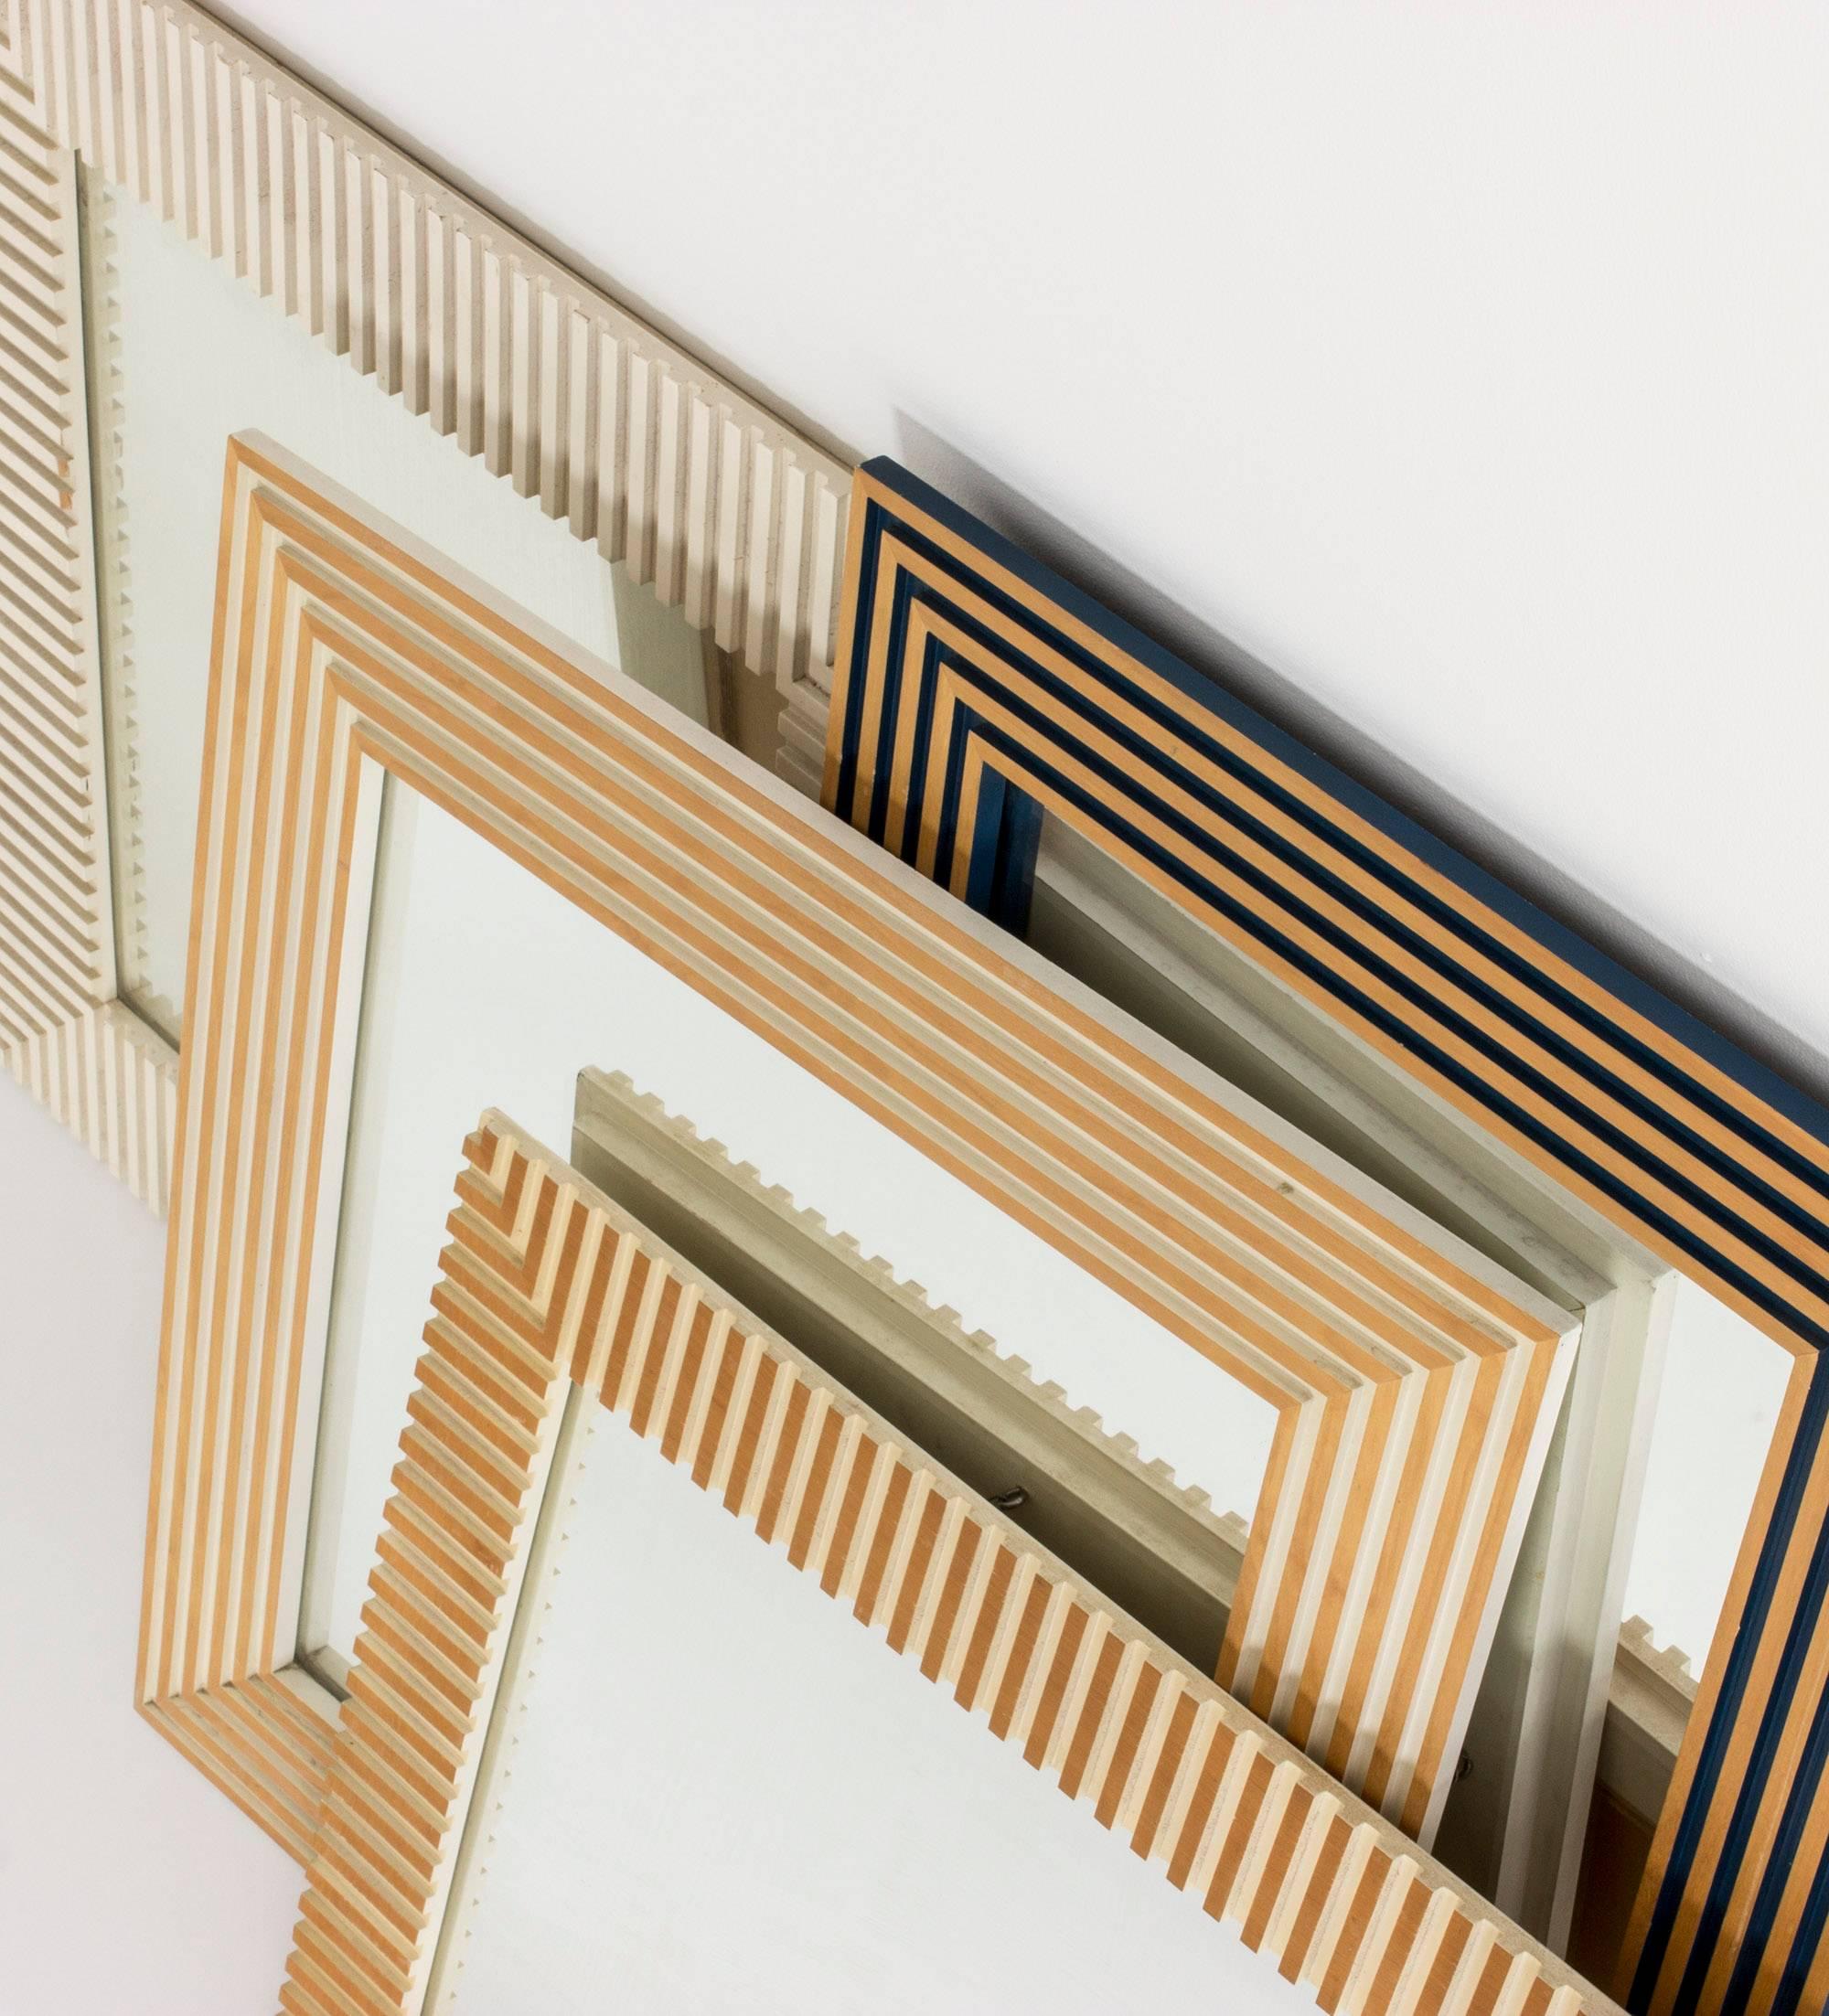 Striking, timeless wall mirror by Susanne Tucker and Maurice Holland, made from wood embossed in a geometrical fashion. Frame lacquered white inside the embossments, with wood exposed on the surface, giving an impression of it being gilded.